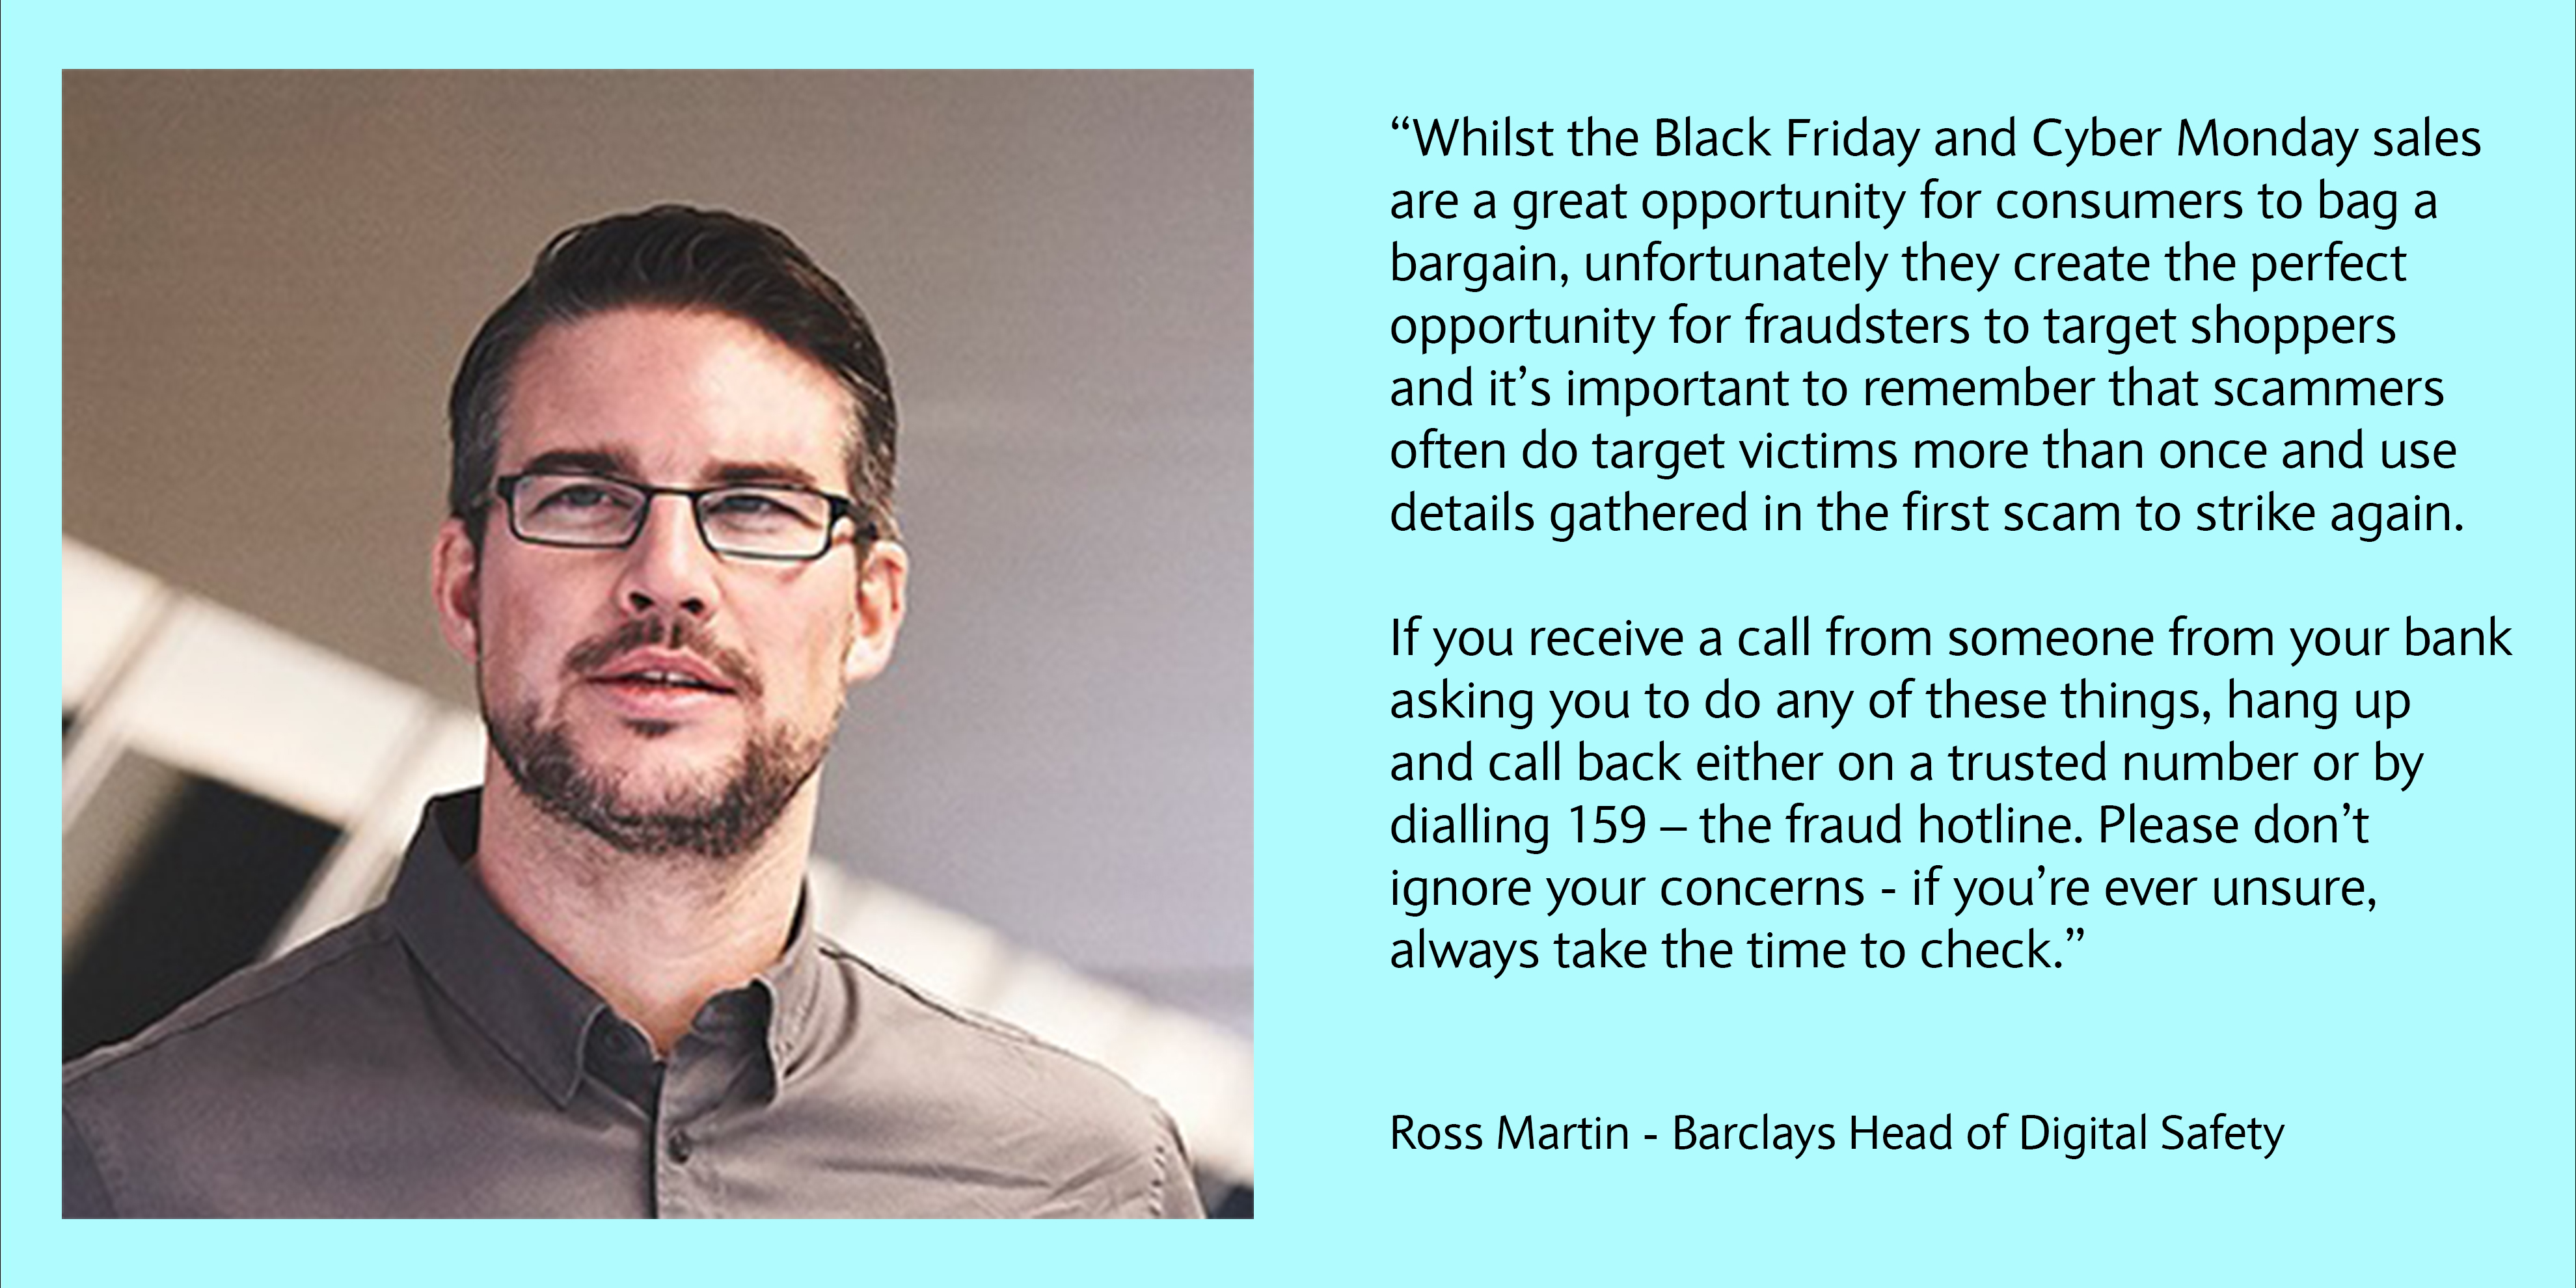 Whilst the Black Friday and Cyber Monday sales are a great opportunity for consumers to bag a bargain, unfortunately they create the perfect opportunity for fraudsters to target shoppers and it’s important to remember that scammers often do target victims more than once and use details gathered in the first scam to strike again. If you receive a call from someone from your bank asking you to do any of these things, hang up and call back either on a trusted number or by dialling 159 – the fraud hotline. Please don’t ignore your concerns - if you’re ever unsure, always take the time to check.